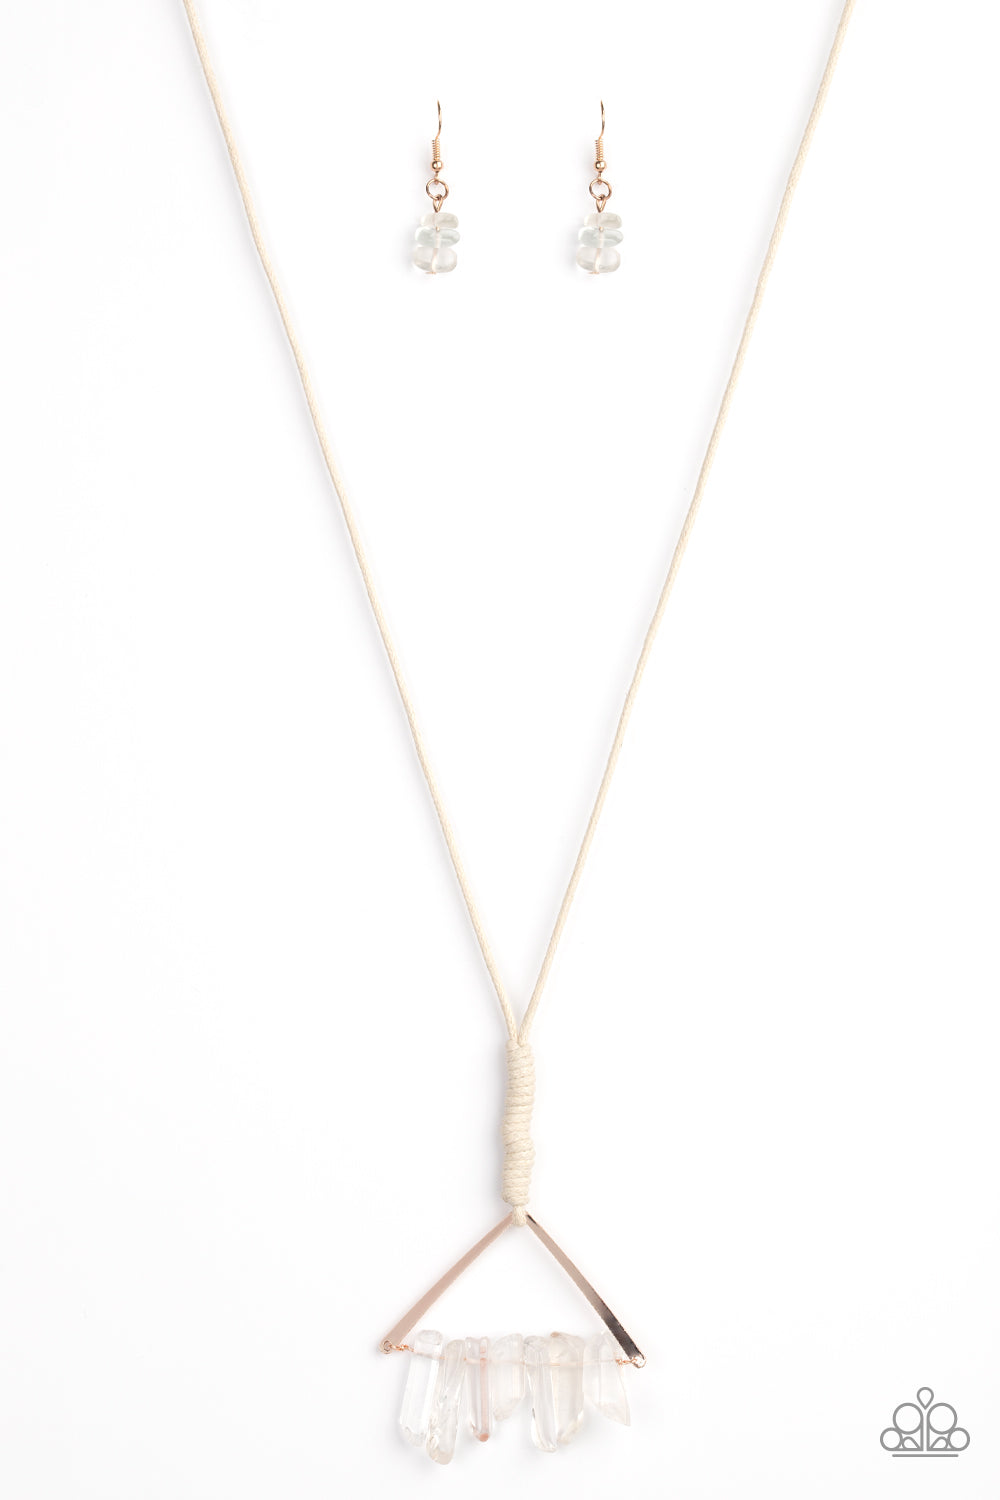 Paparazzi Accessories - Raw Talent - Rose Gold #N513 - Necklace